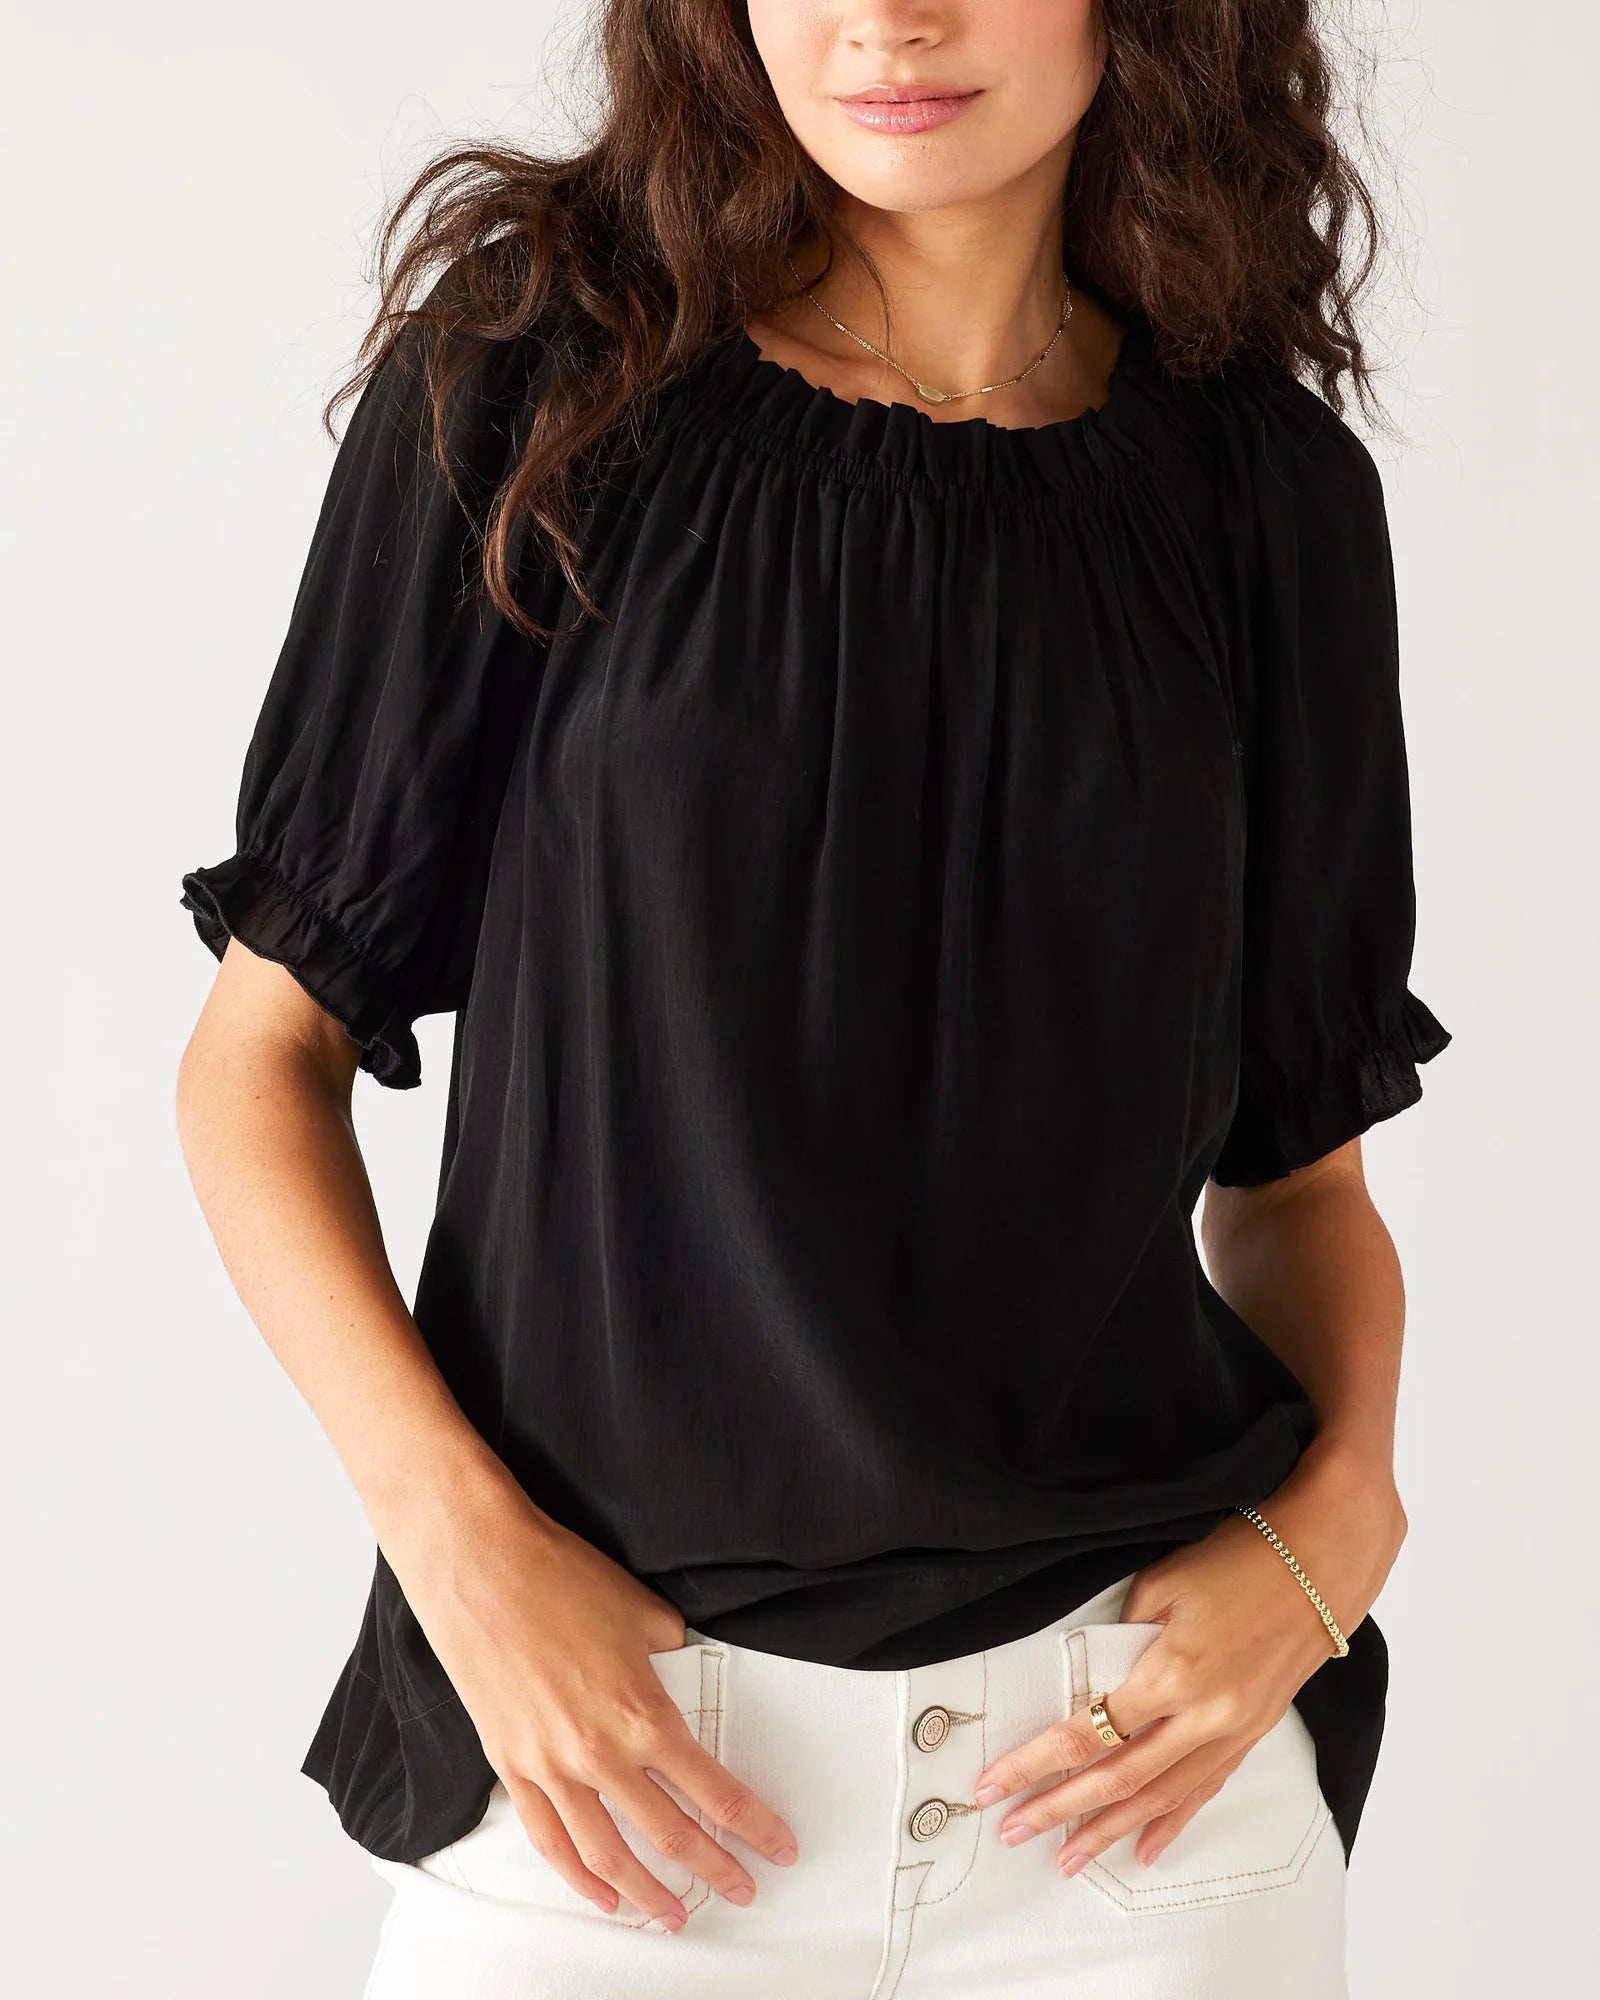 silky short sleeve top, can be worn off the shoulder